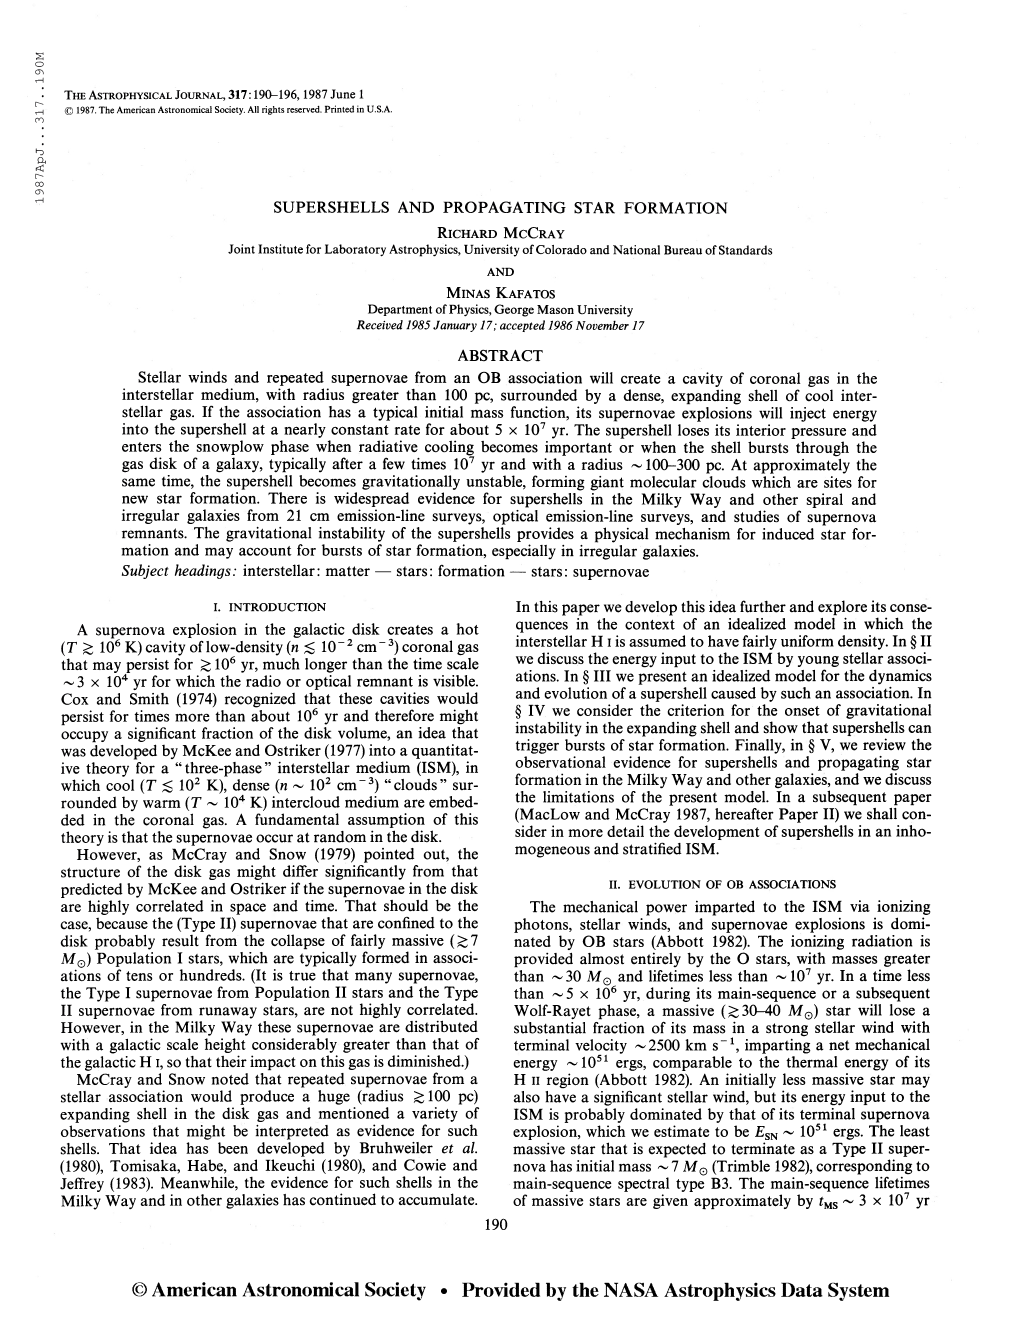 1987Apj. . .317. .190M the Astrophysical Journal, 317:190-196,1987 June 1 © 1987. the American Astronomical Society. All Rights